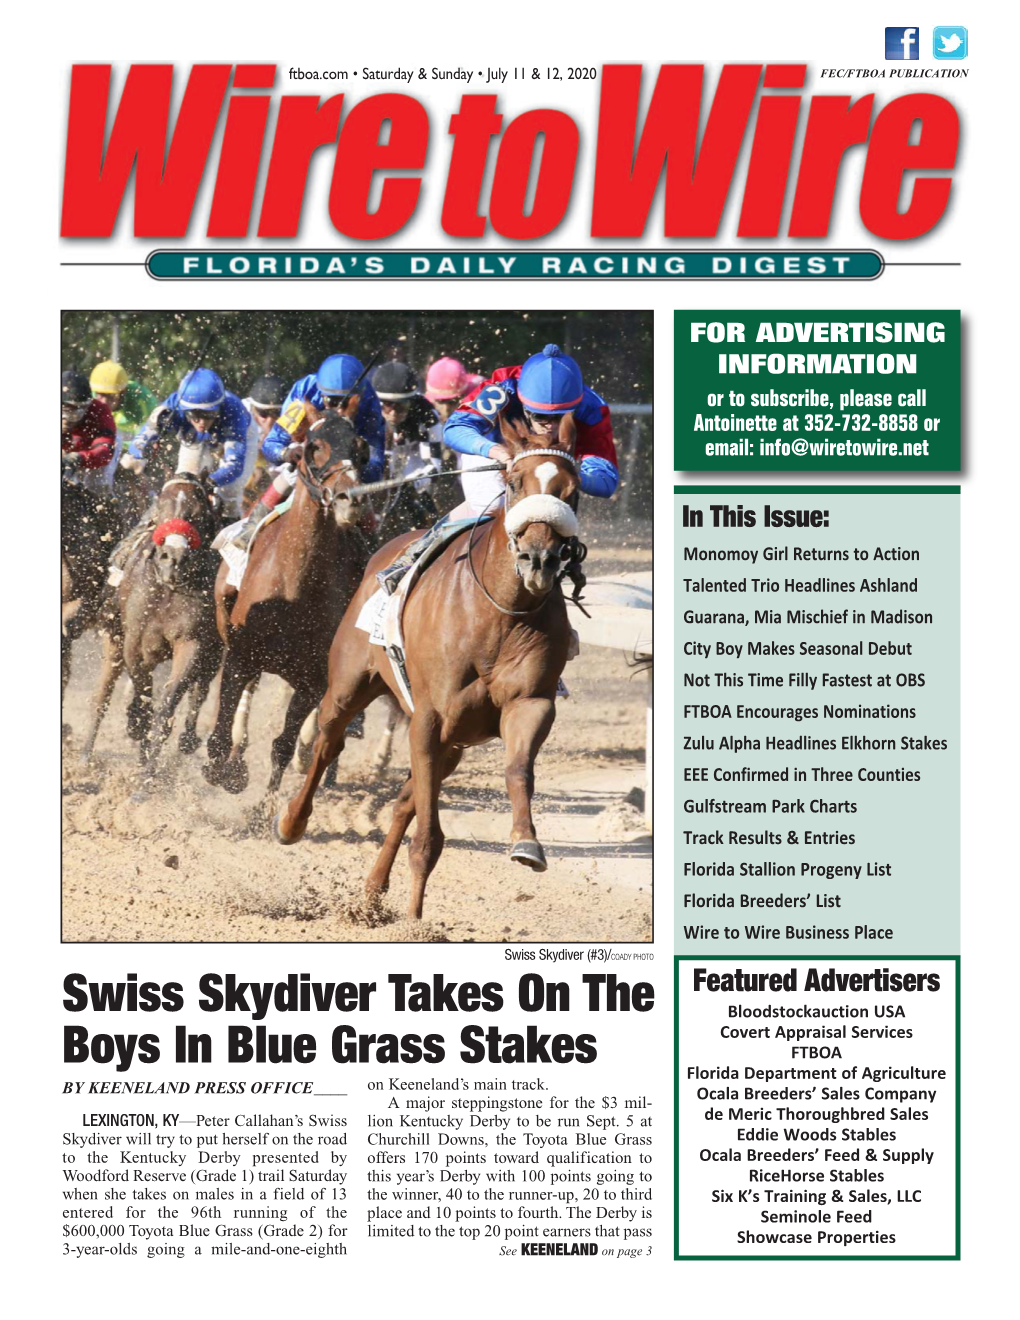 Swiss Skydiver Takes on the Boys in Blue Grass Stakes